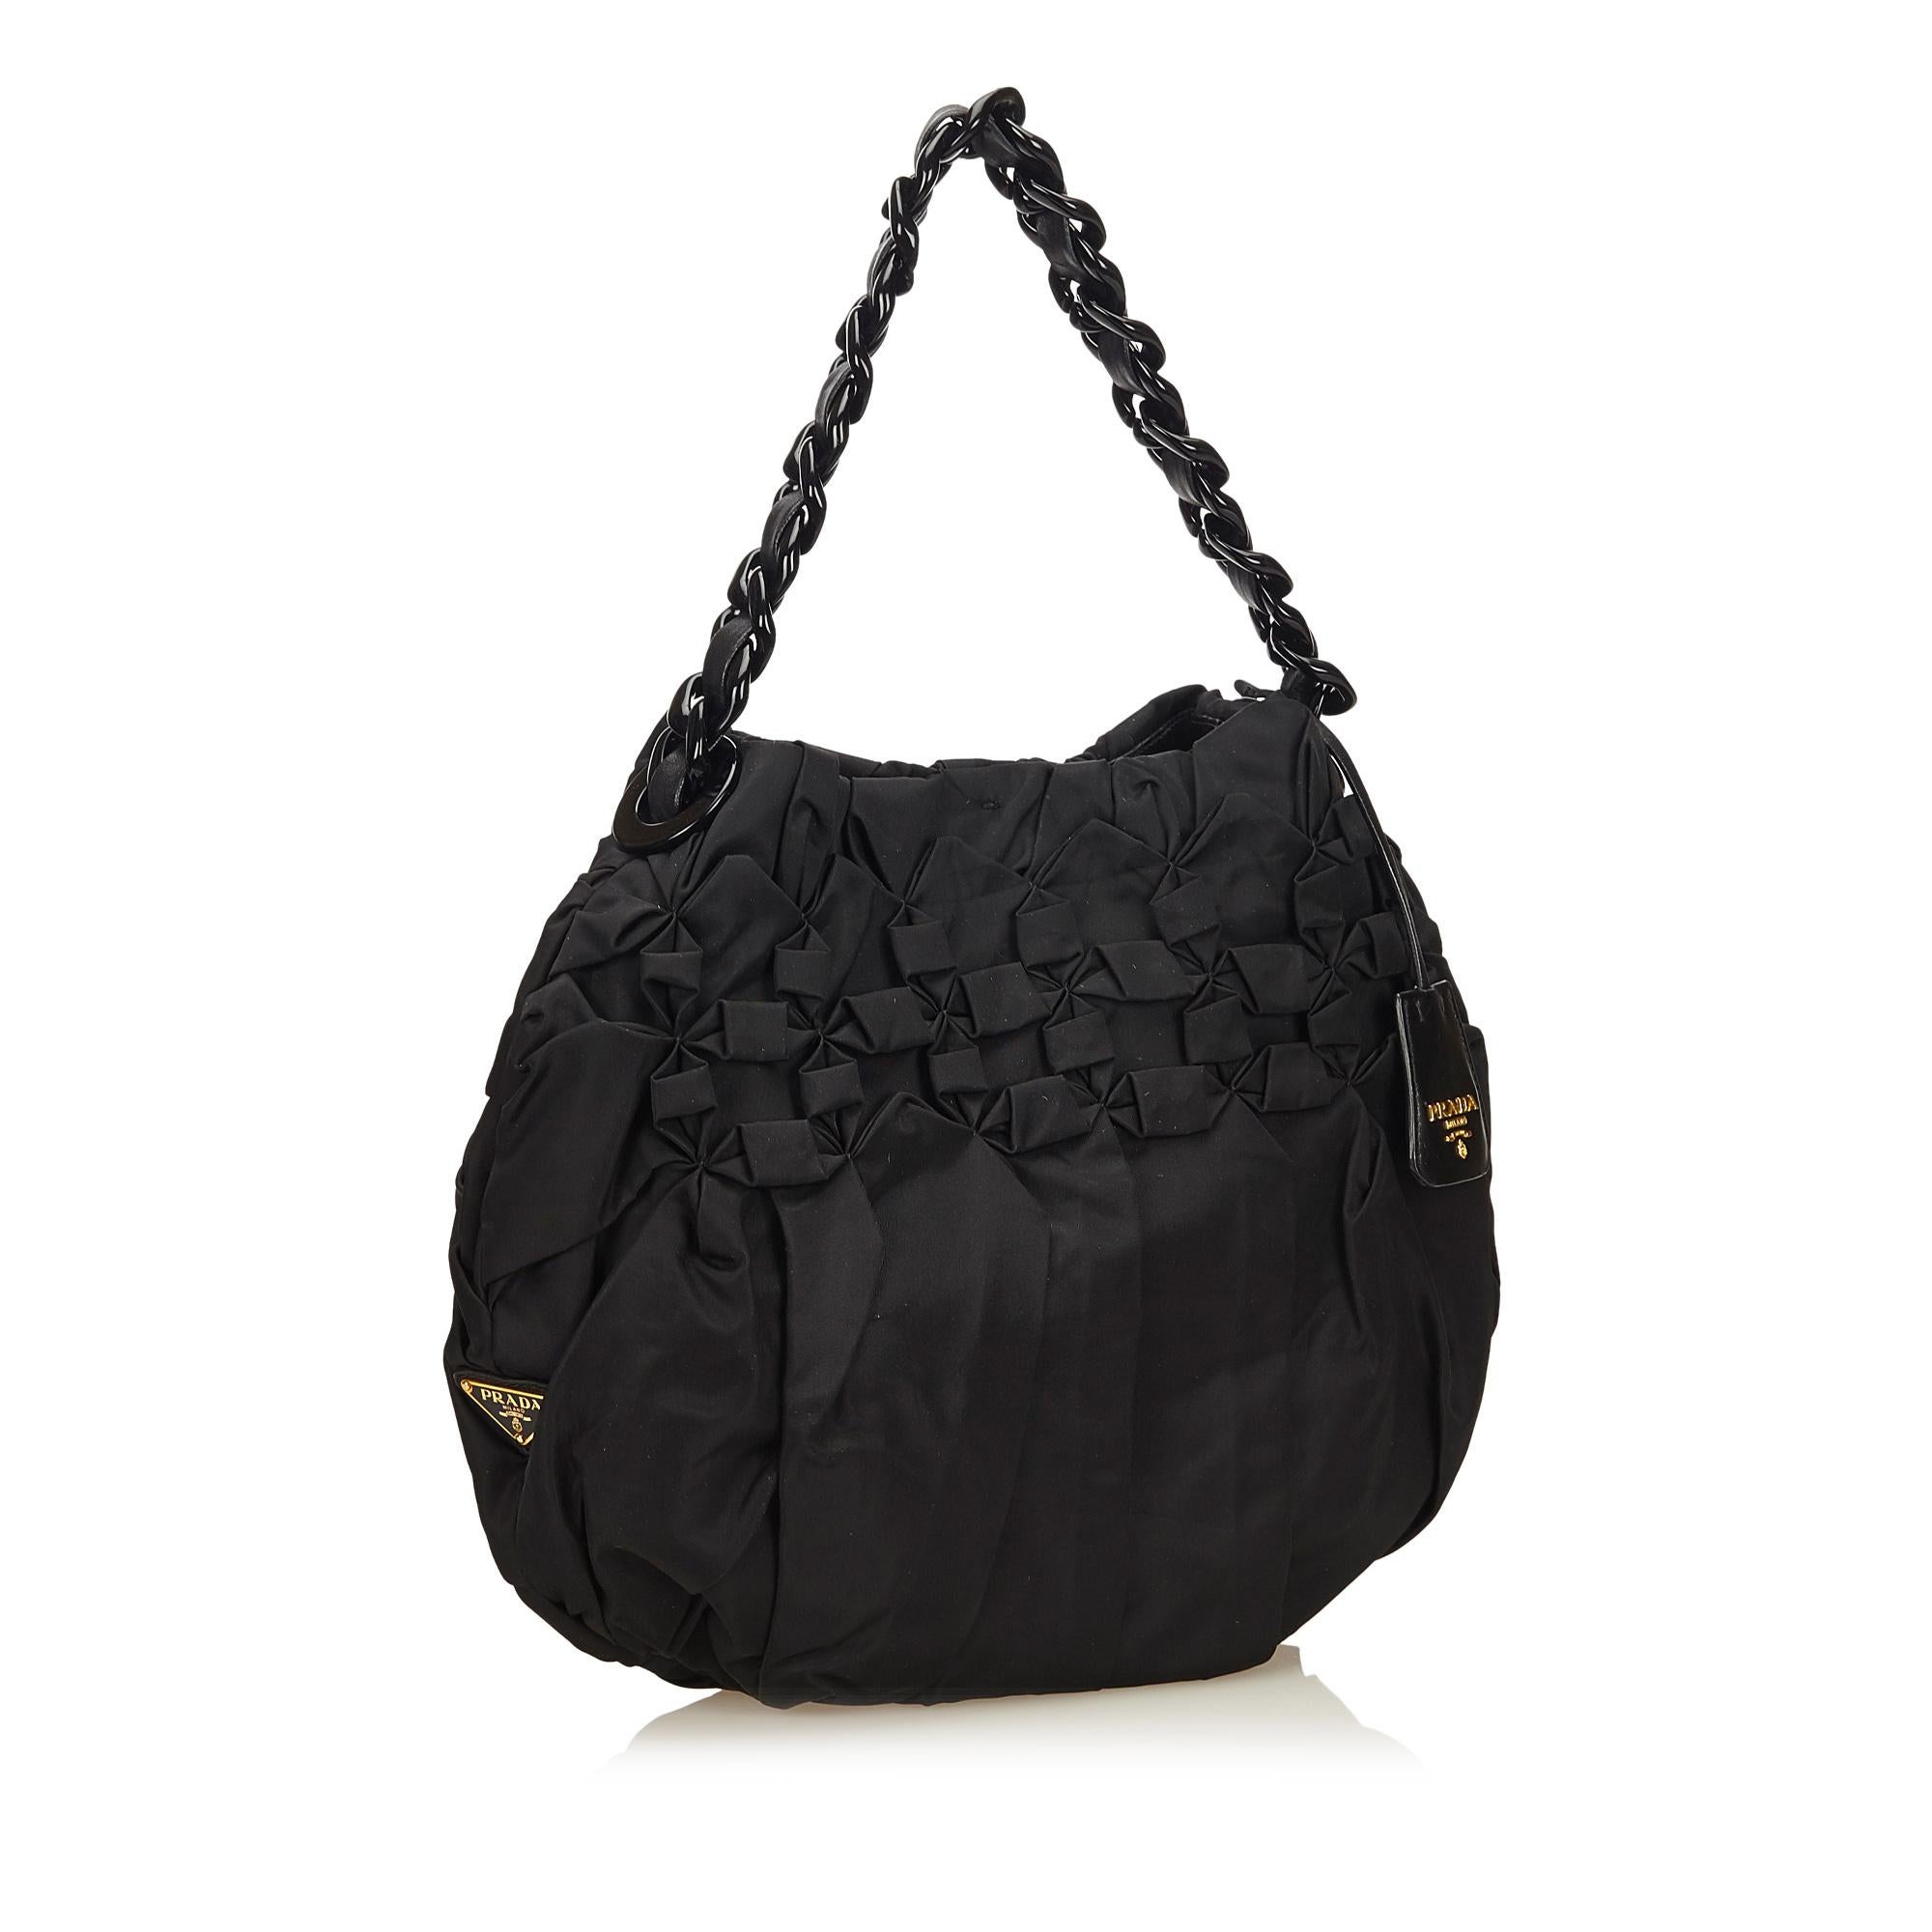 This shoulder bag features a nylon body, leather chain strap, open top with magnetic closure, and interior zip and slip pockets. It carries as AB condition rating.

Inclusions: 
This item does not come with inclusions.

Dimensions:
Length: 29.00